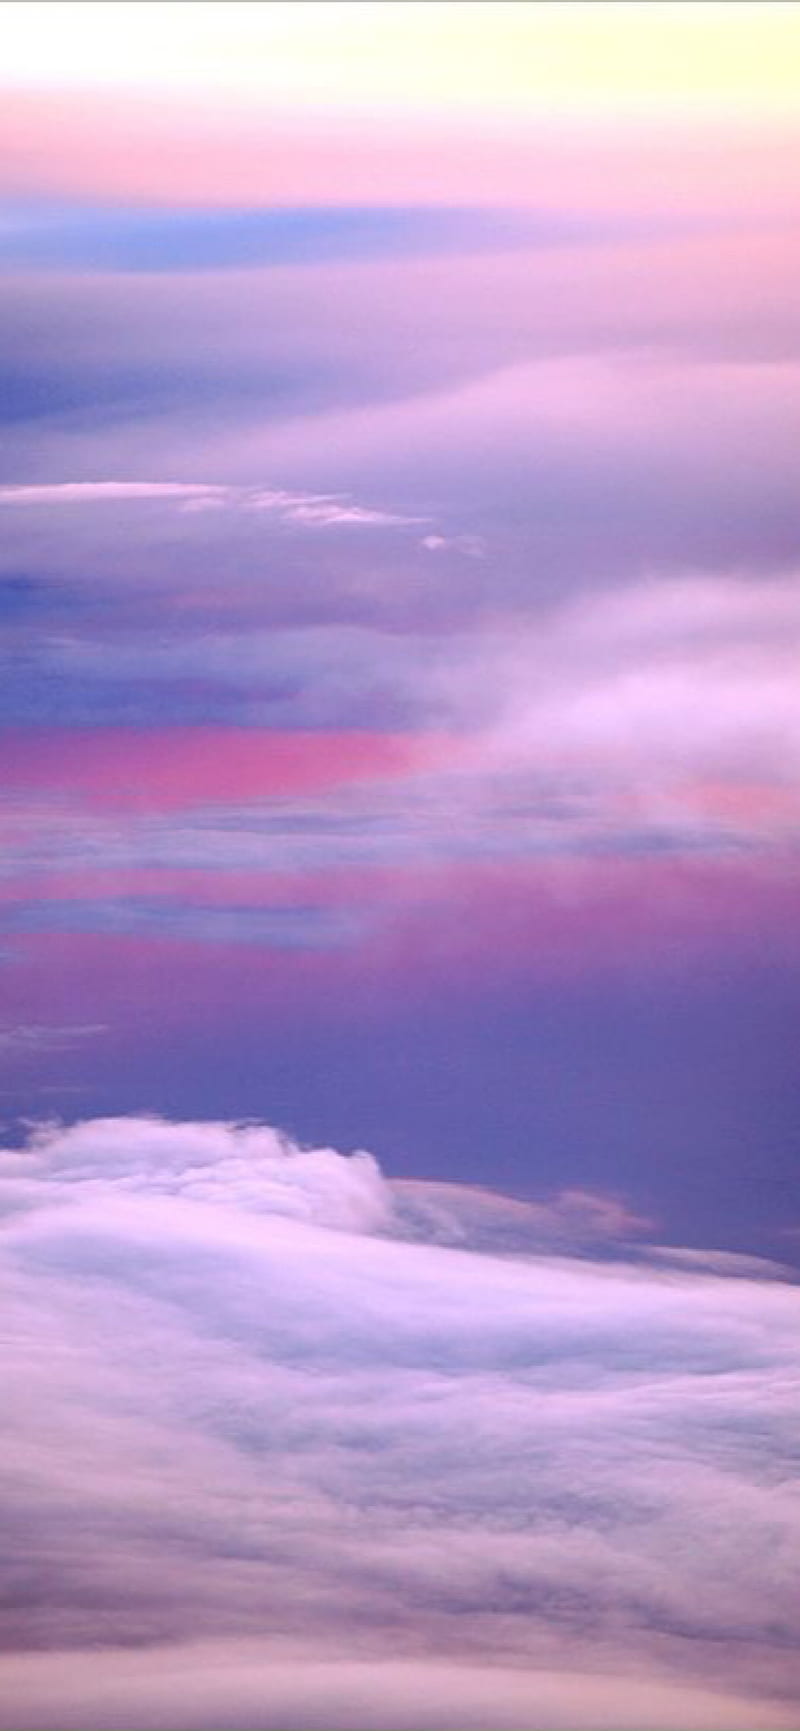 Pastel Sky Wallpaper Abstract Background Clouds Stock Photo 1580487259   Shutterstock